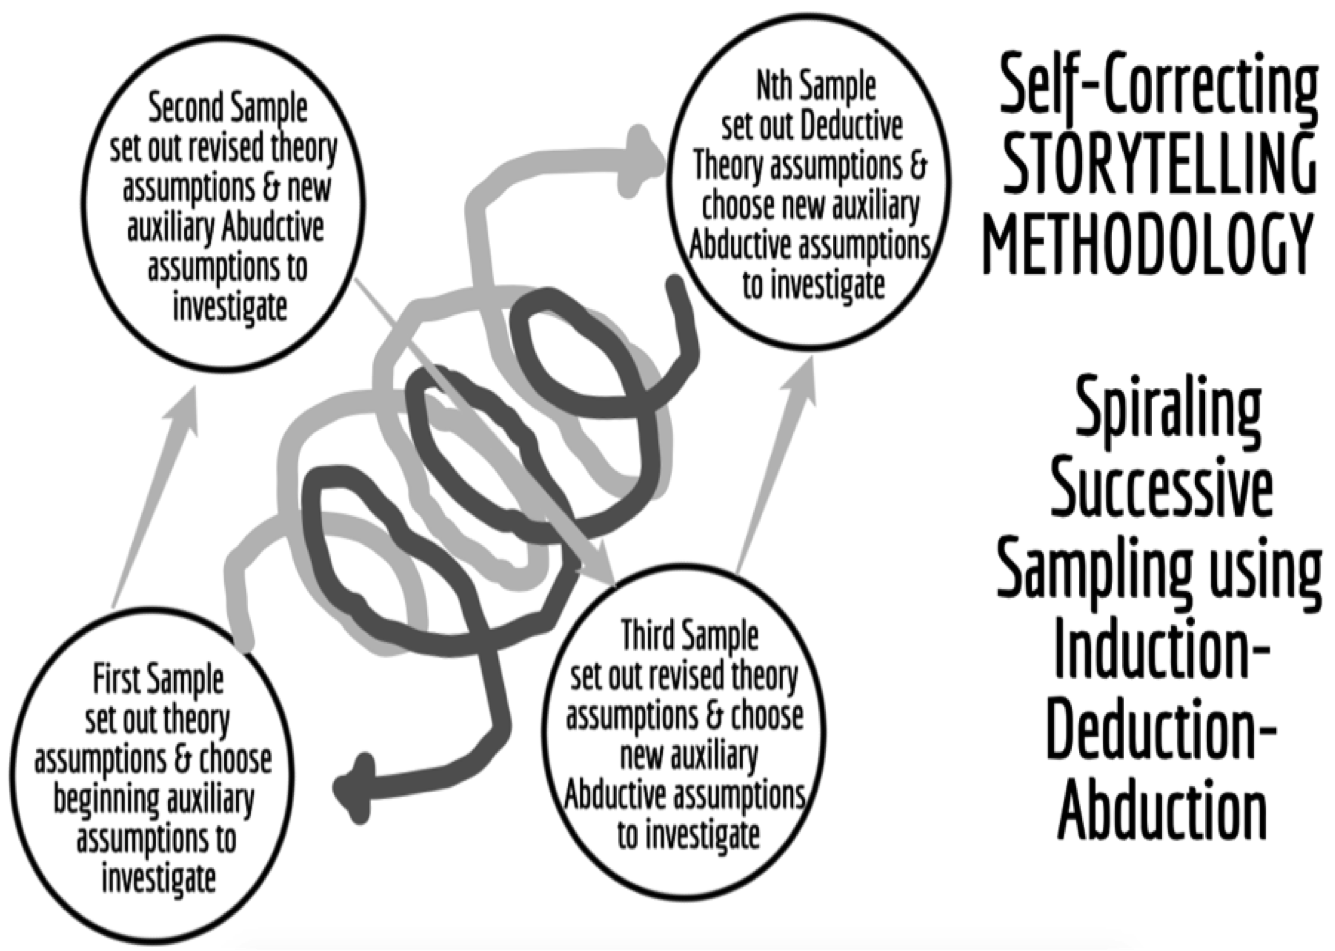 What is self-correcting storytelling science BOJE